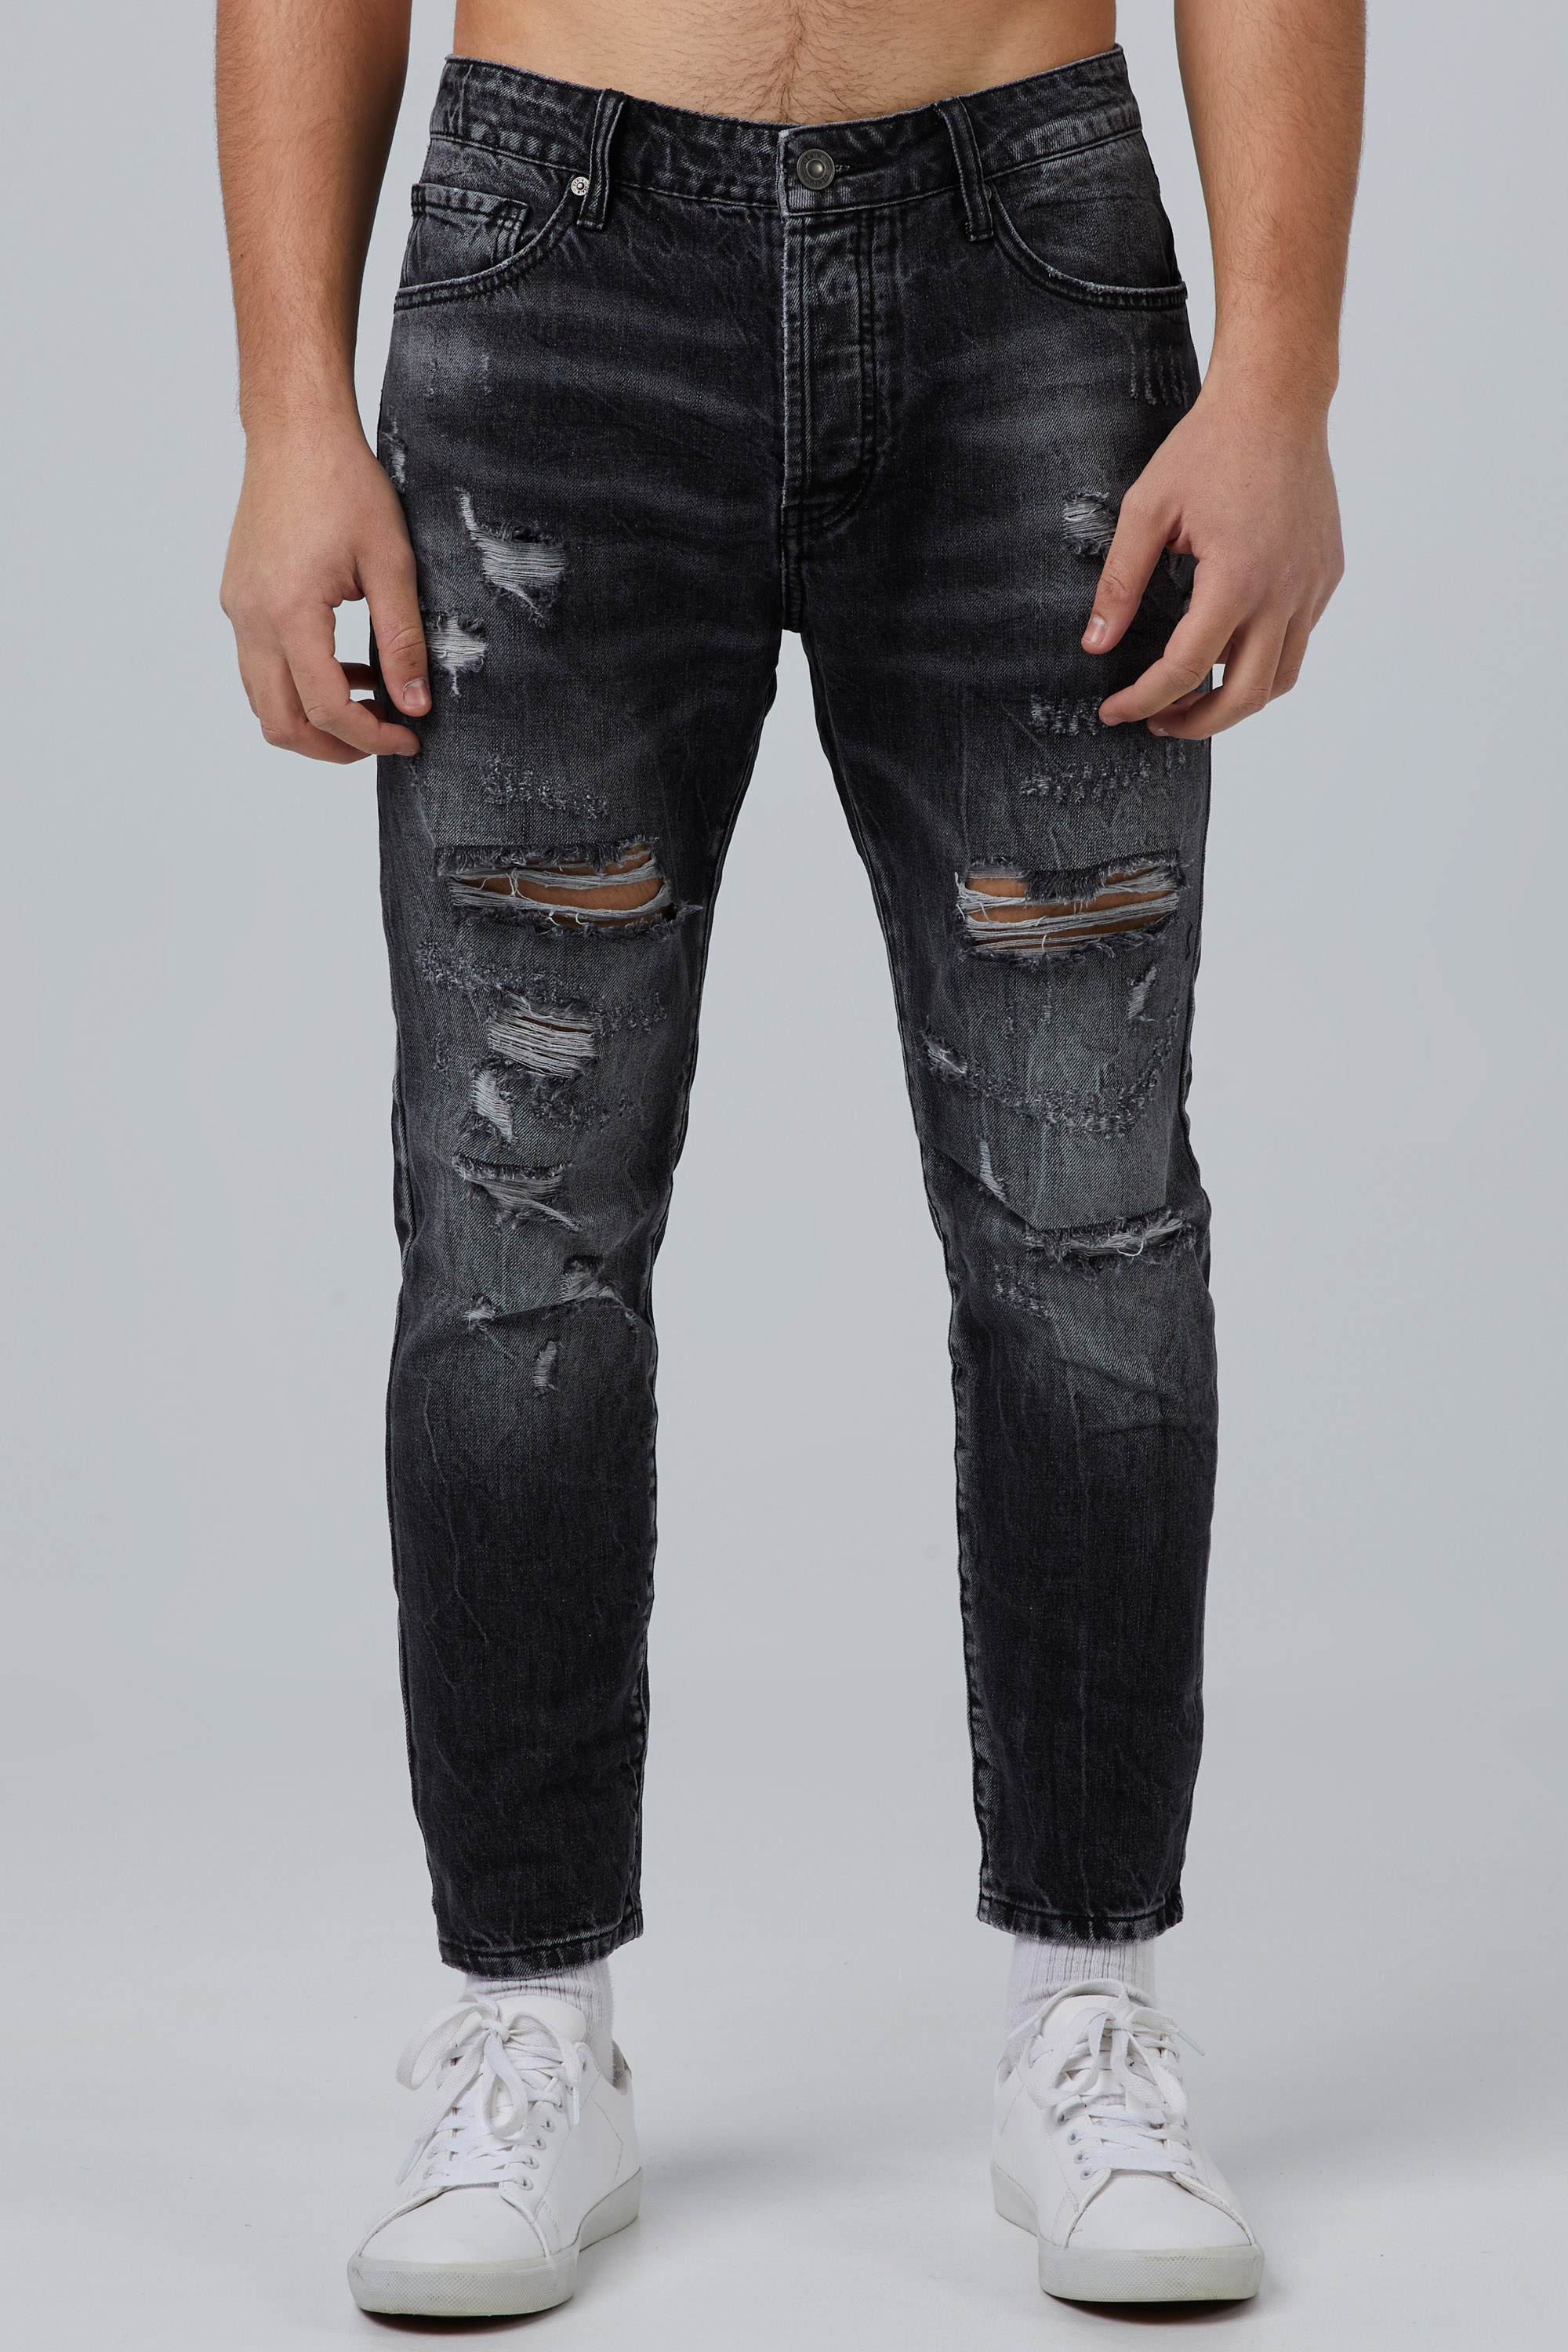 Black Jeans With Rips In Tapered Fit | Aristoteli Bitsiani